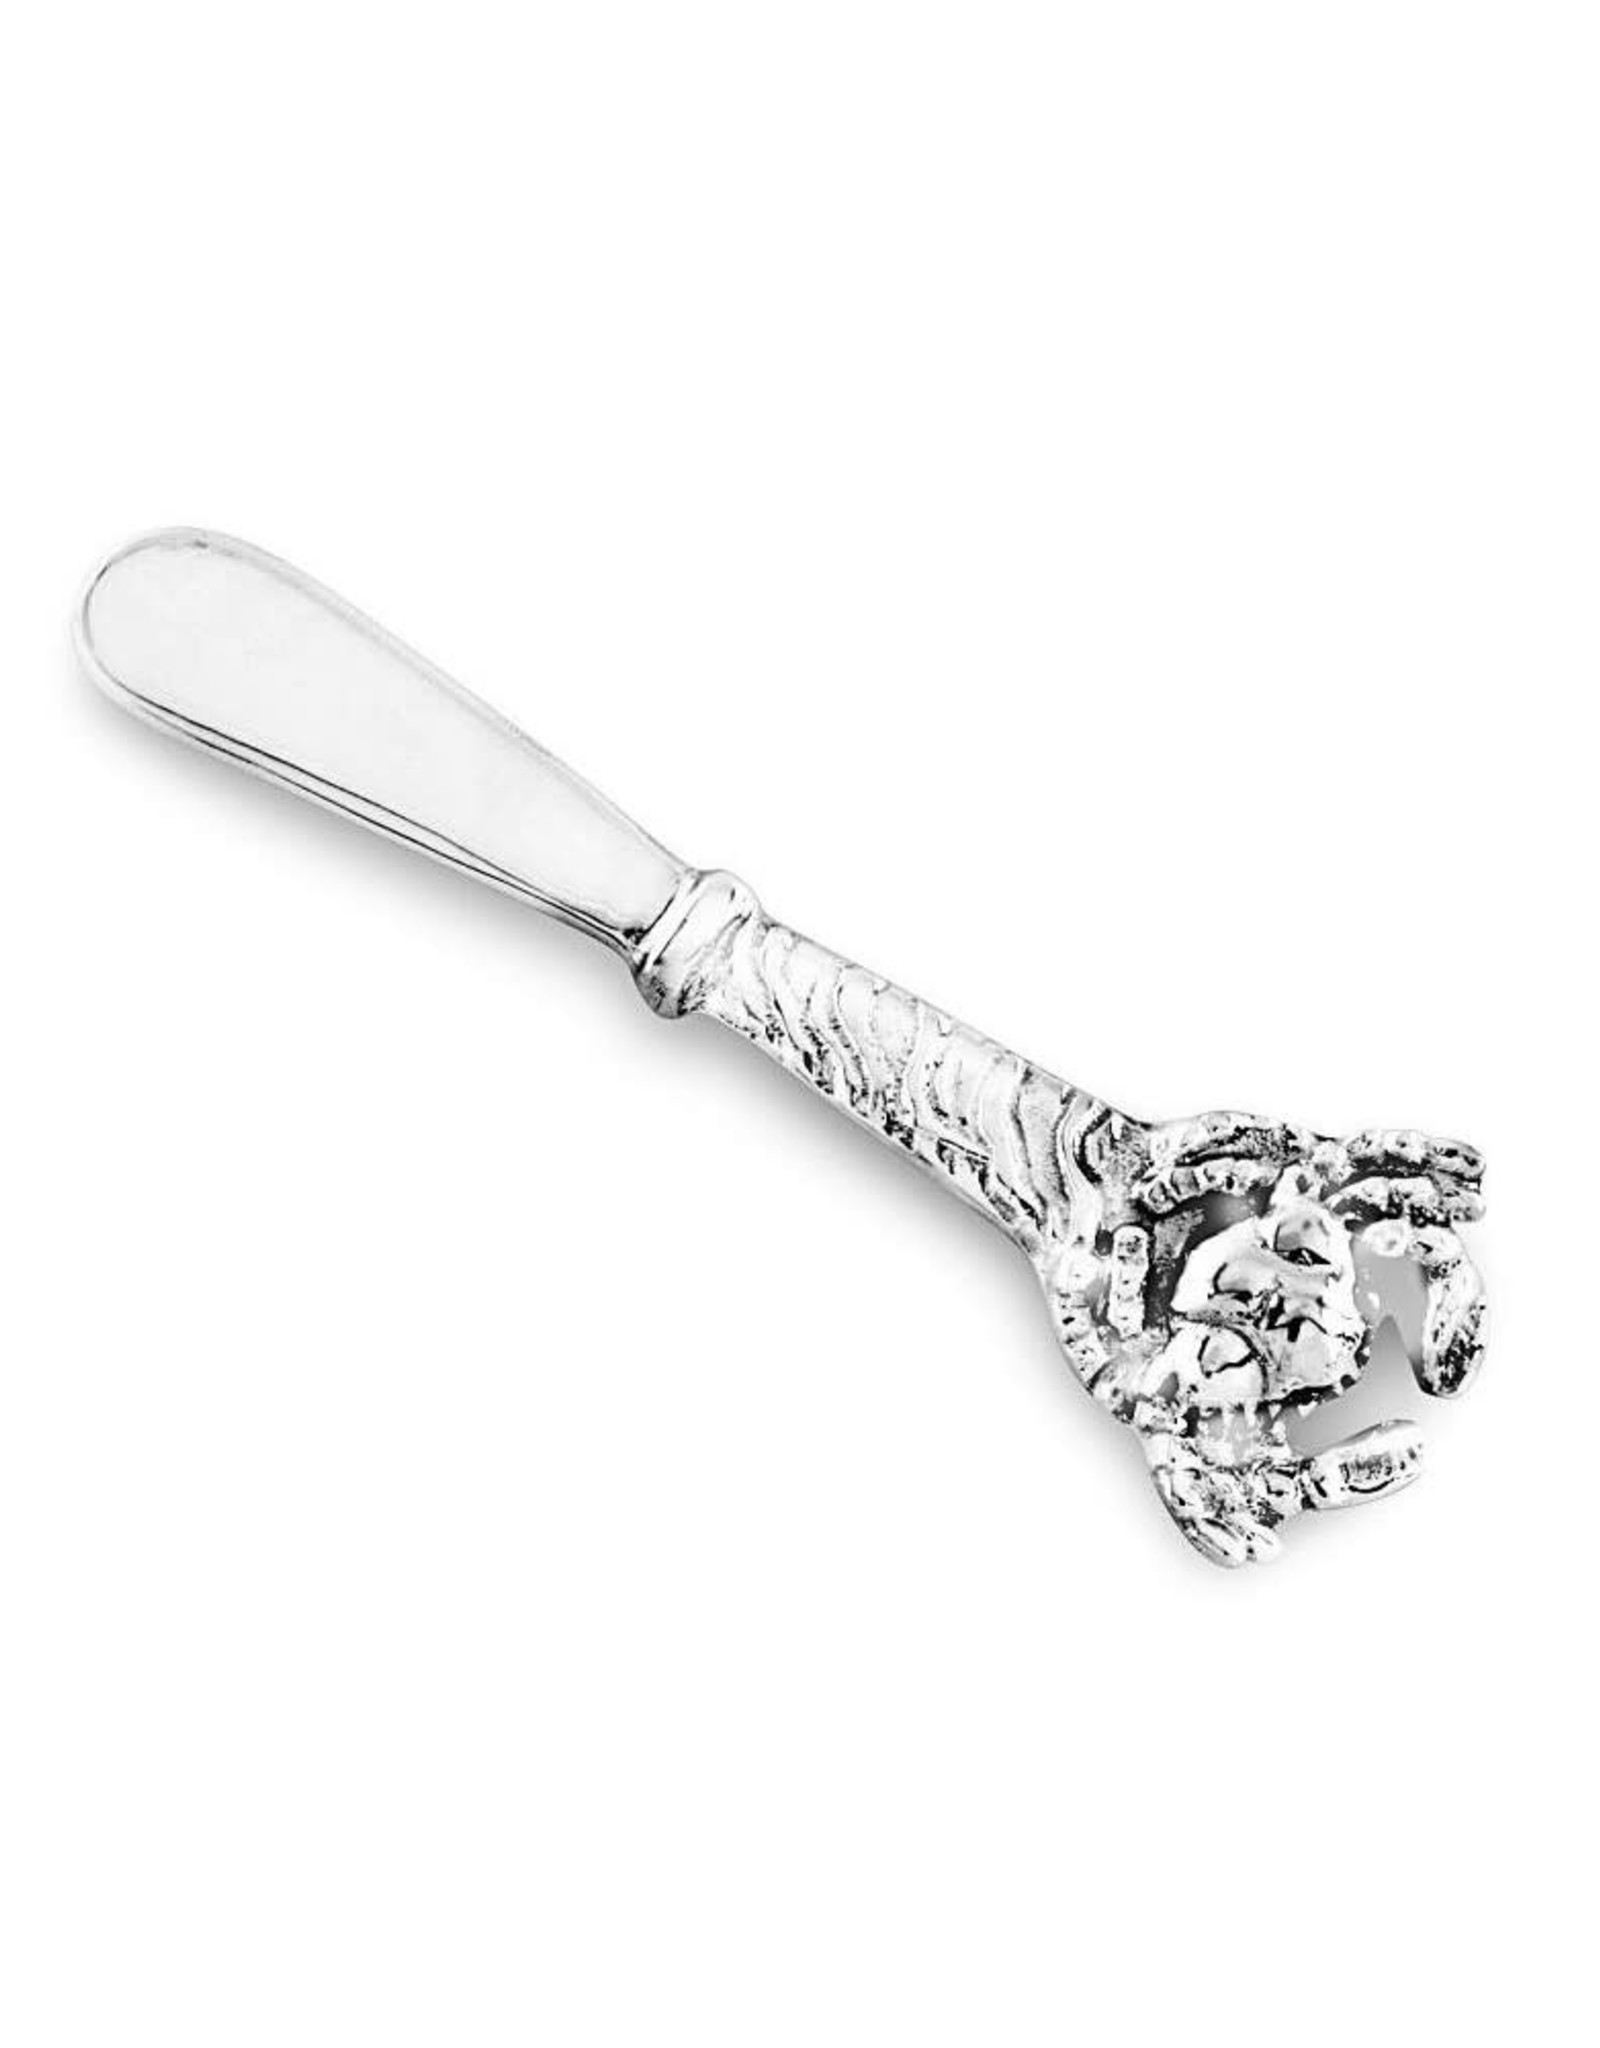 Beatriz Ball Ocean Crab Spreader For Cheese Dips And Spreads